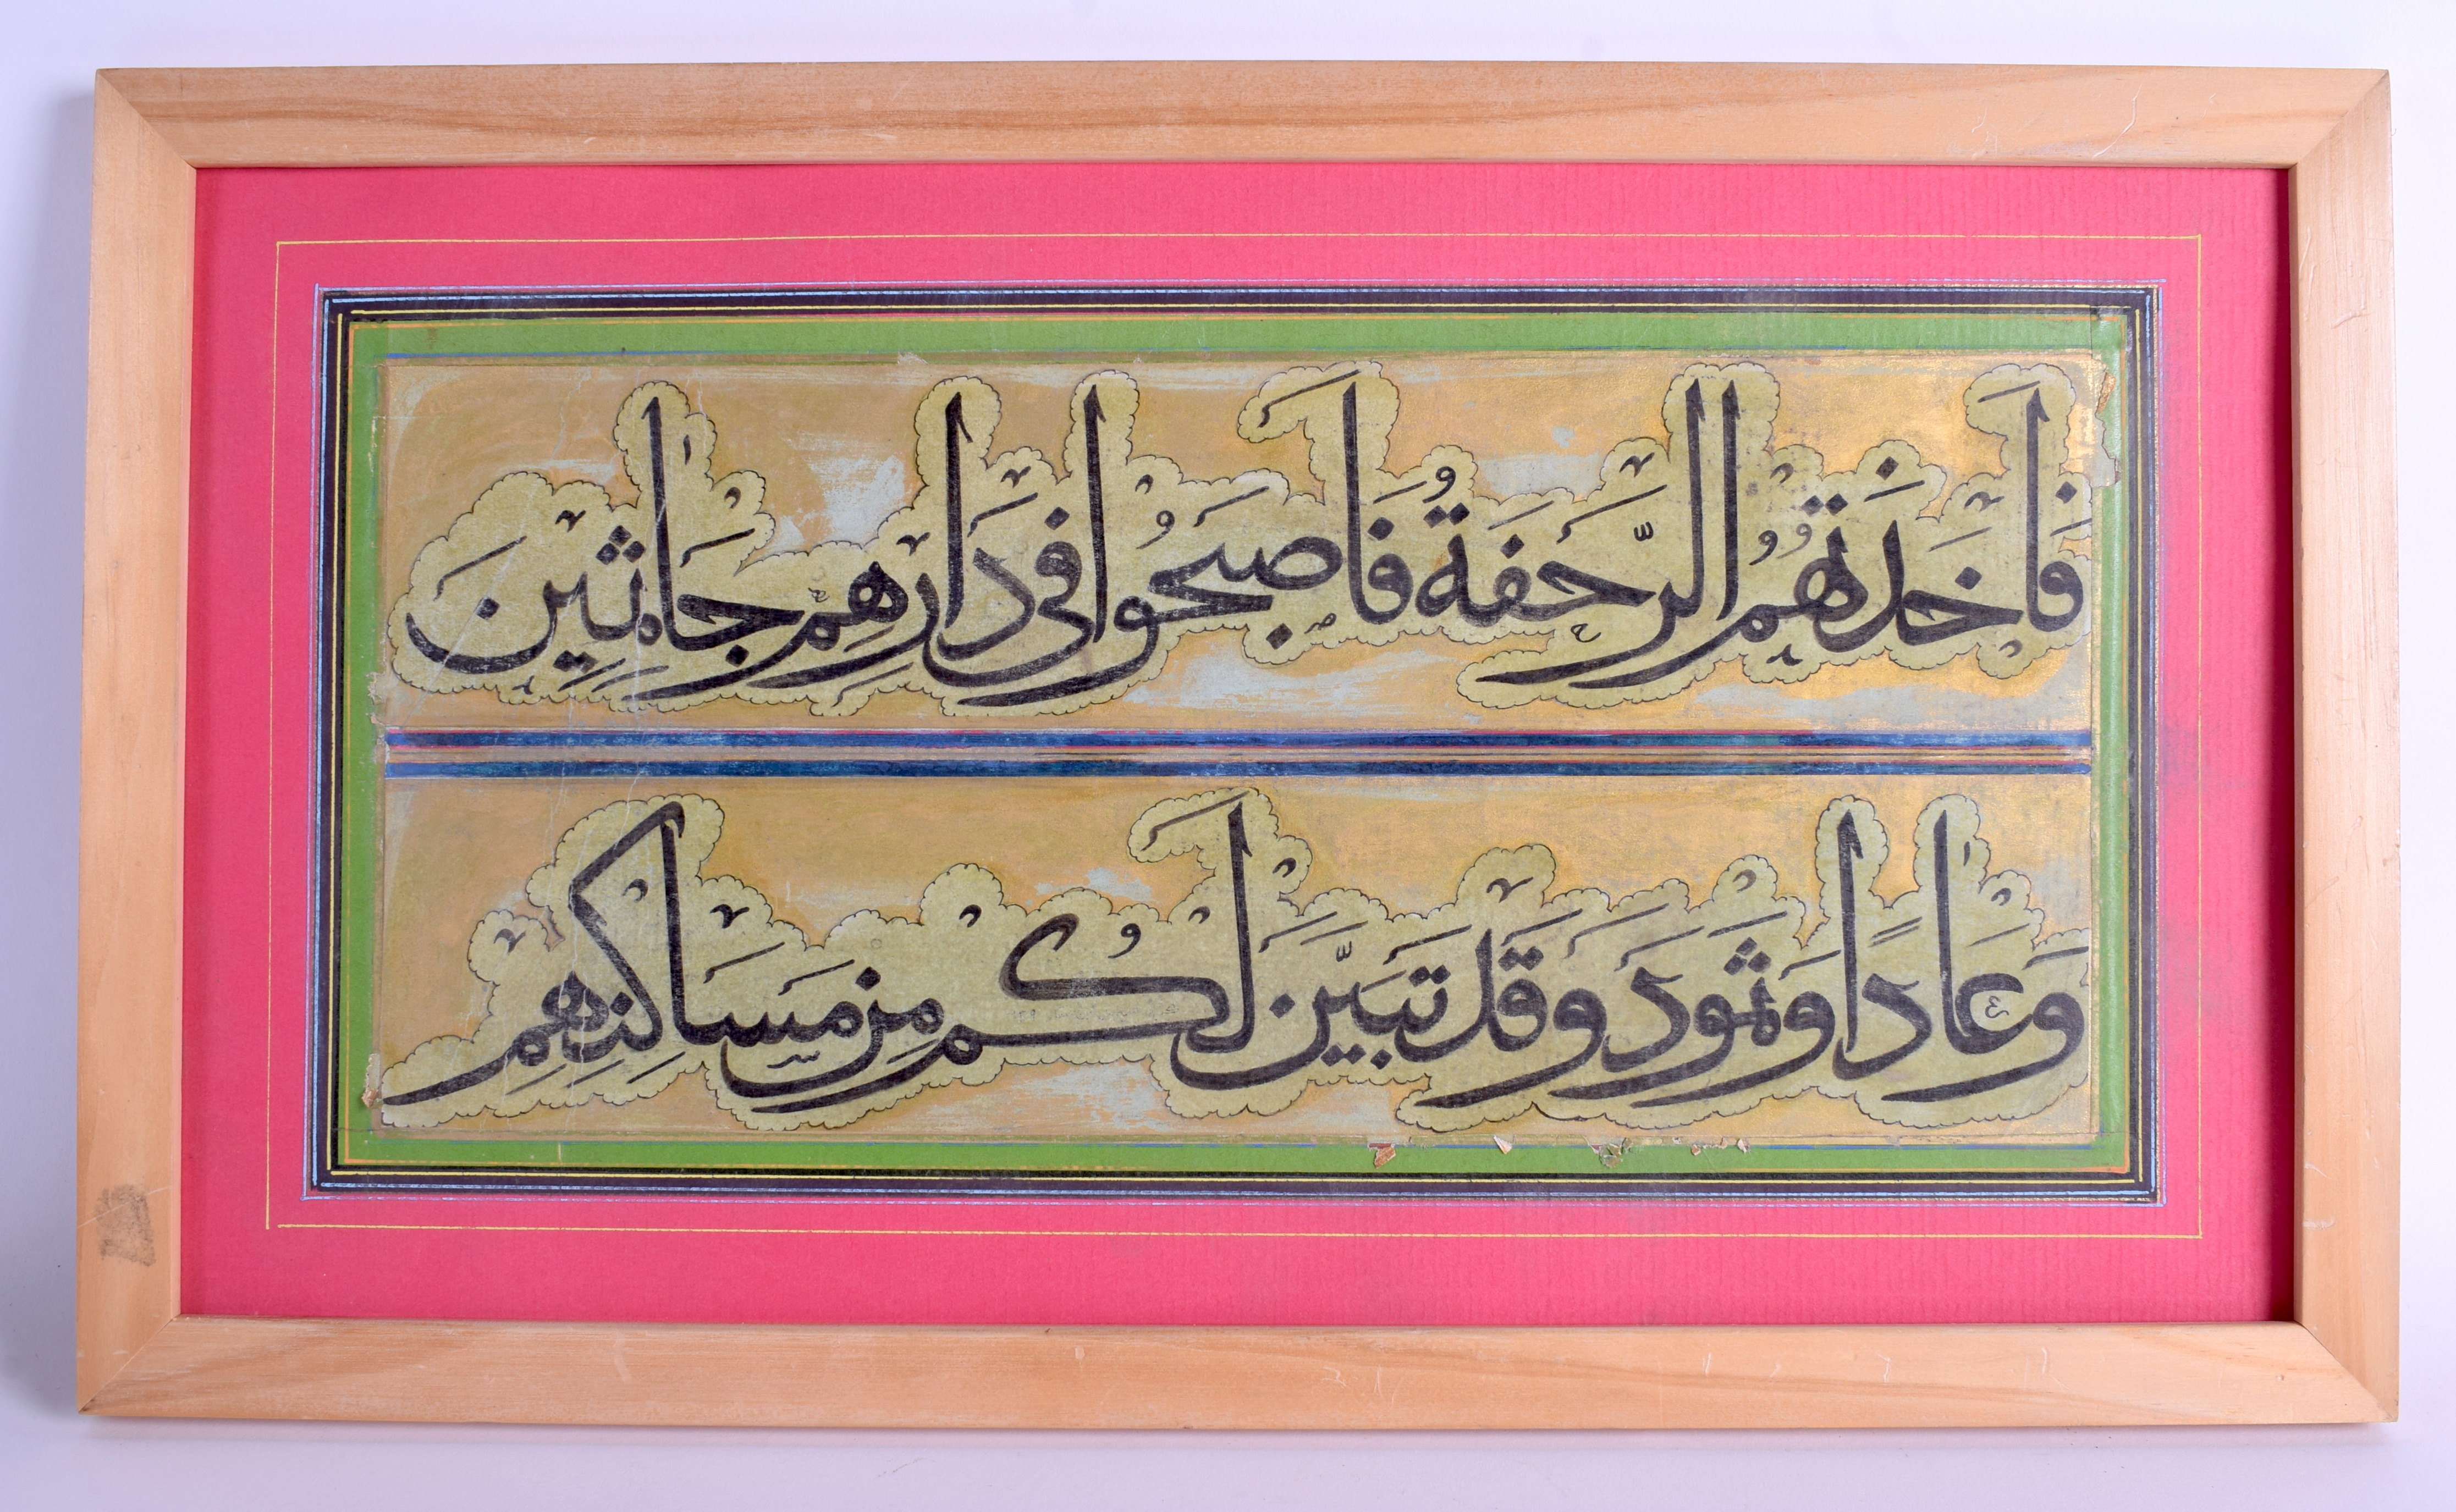 A MIDDLE EASTERN CALLIGRAPHY PANEL. 43 cm x 22 cm.